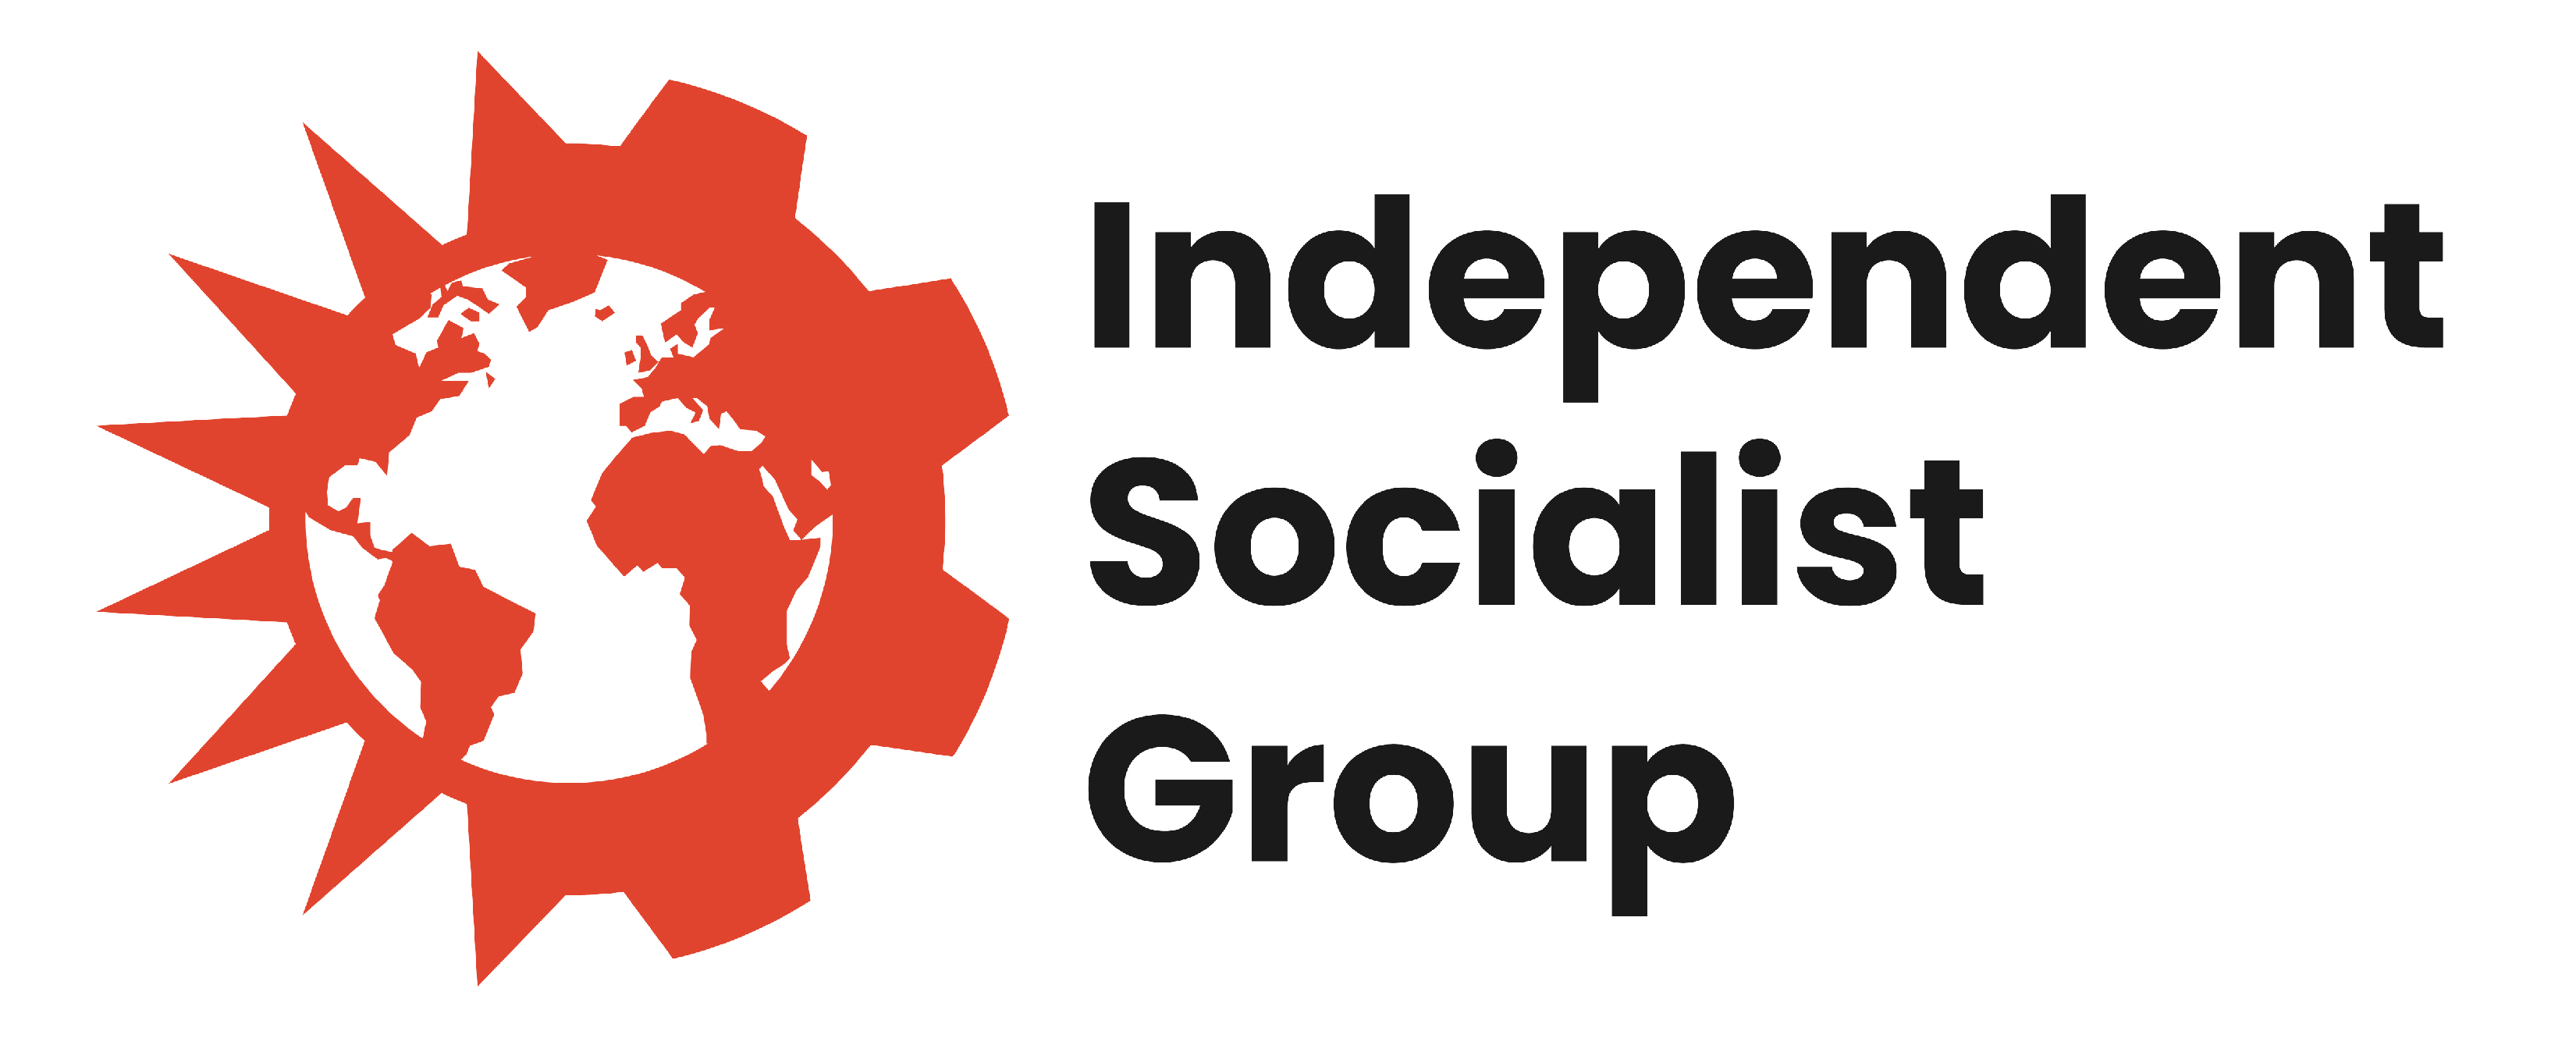 The Independent Socialist Group logo